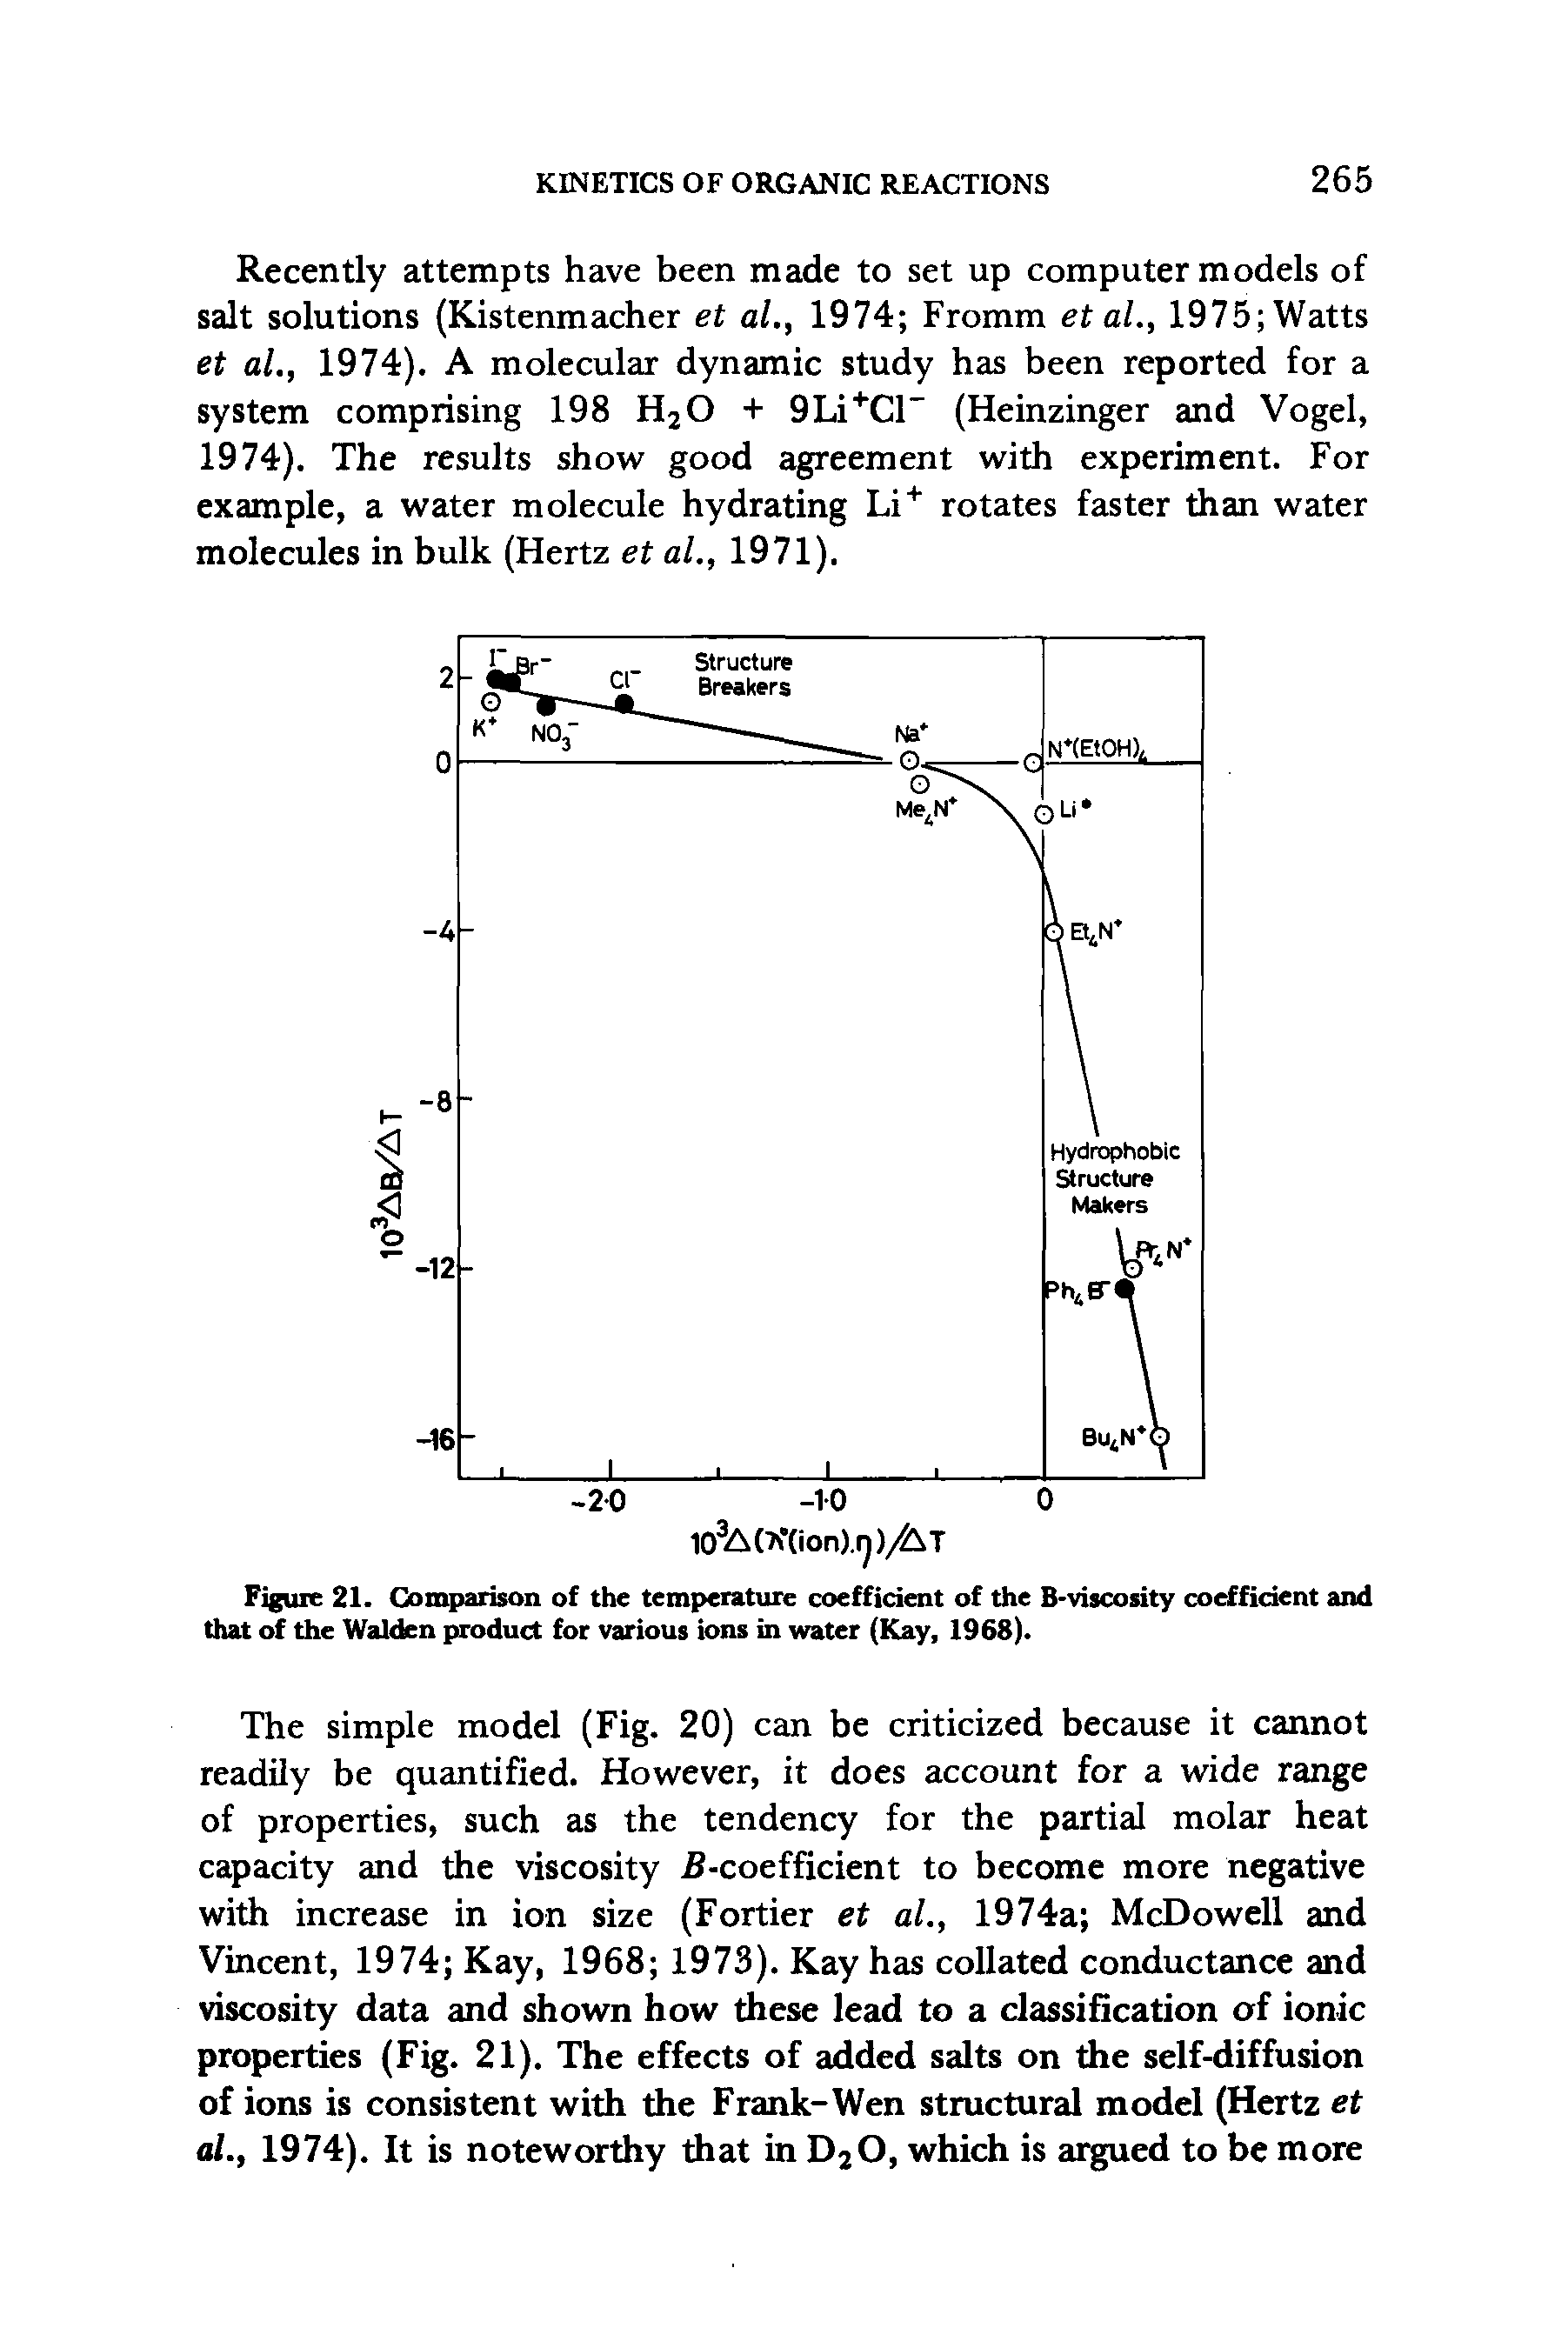 Figure 21. Comparison of the temperature coefficient of the B-viscosity coefficient and that of the Walden product for various ions in water (Kay, 1968).